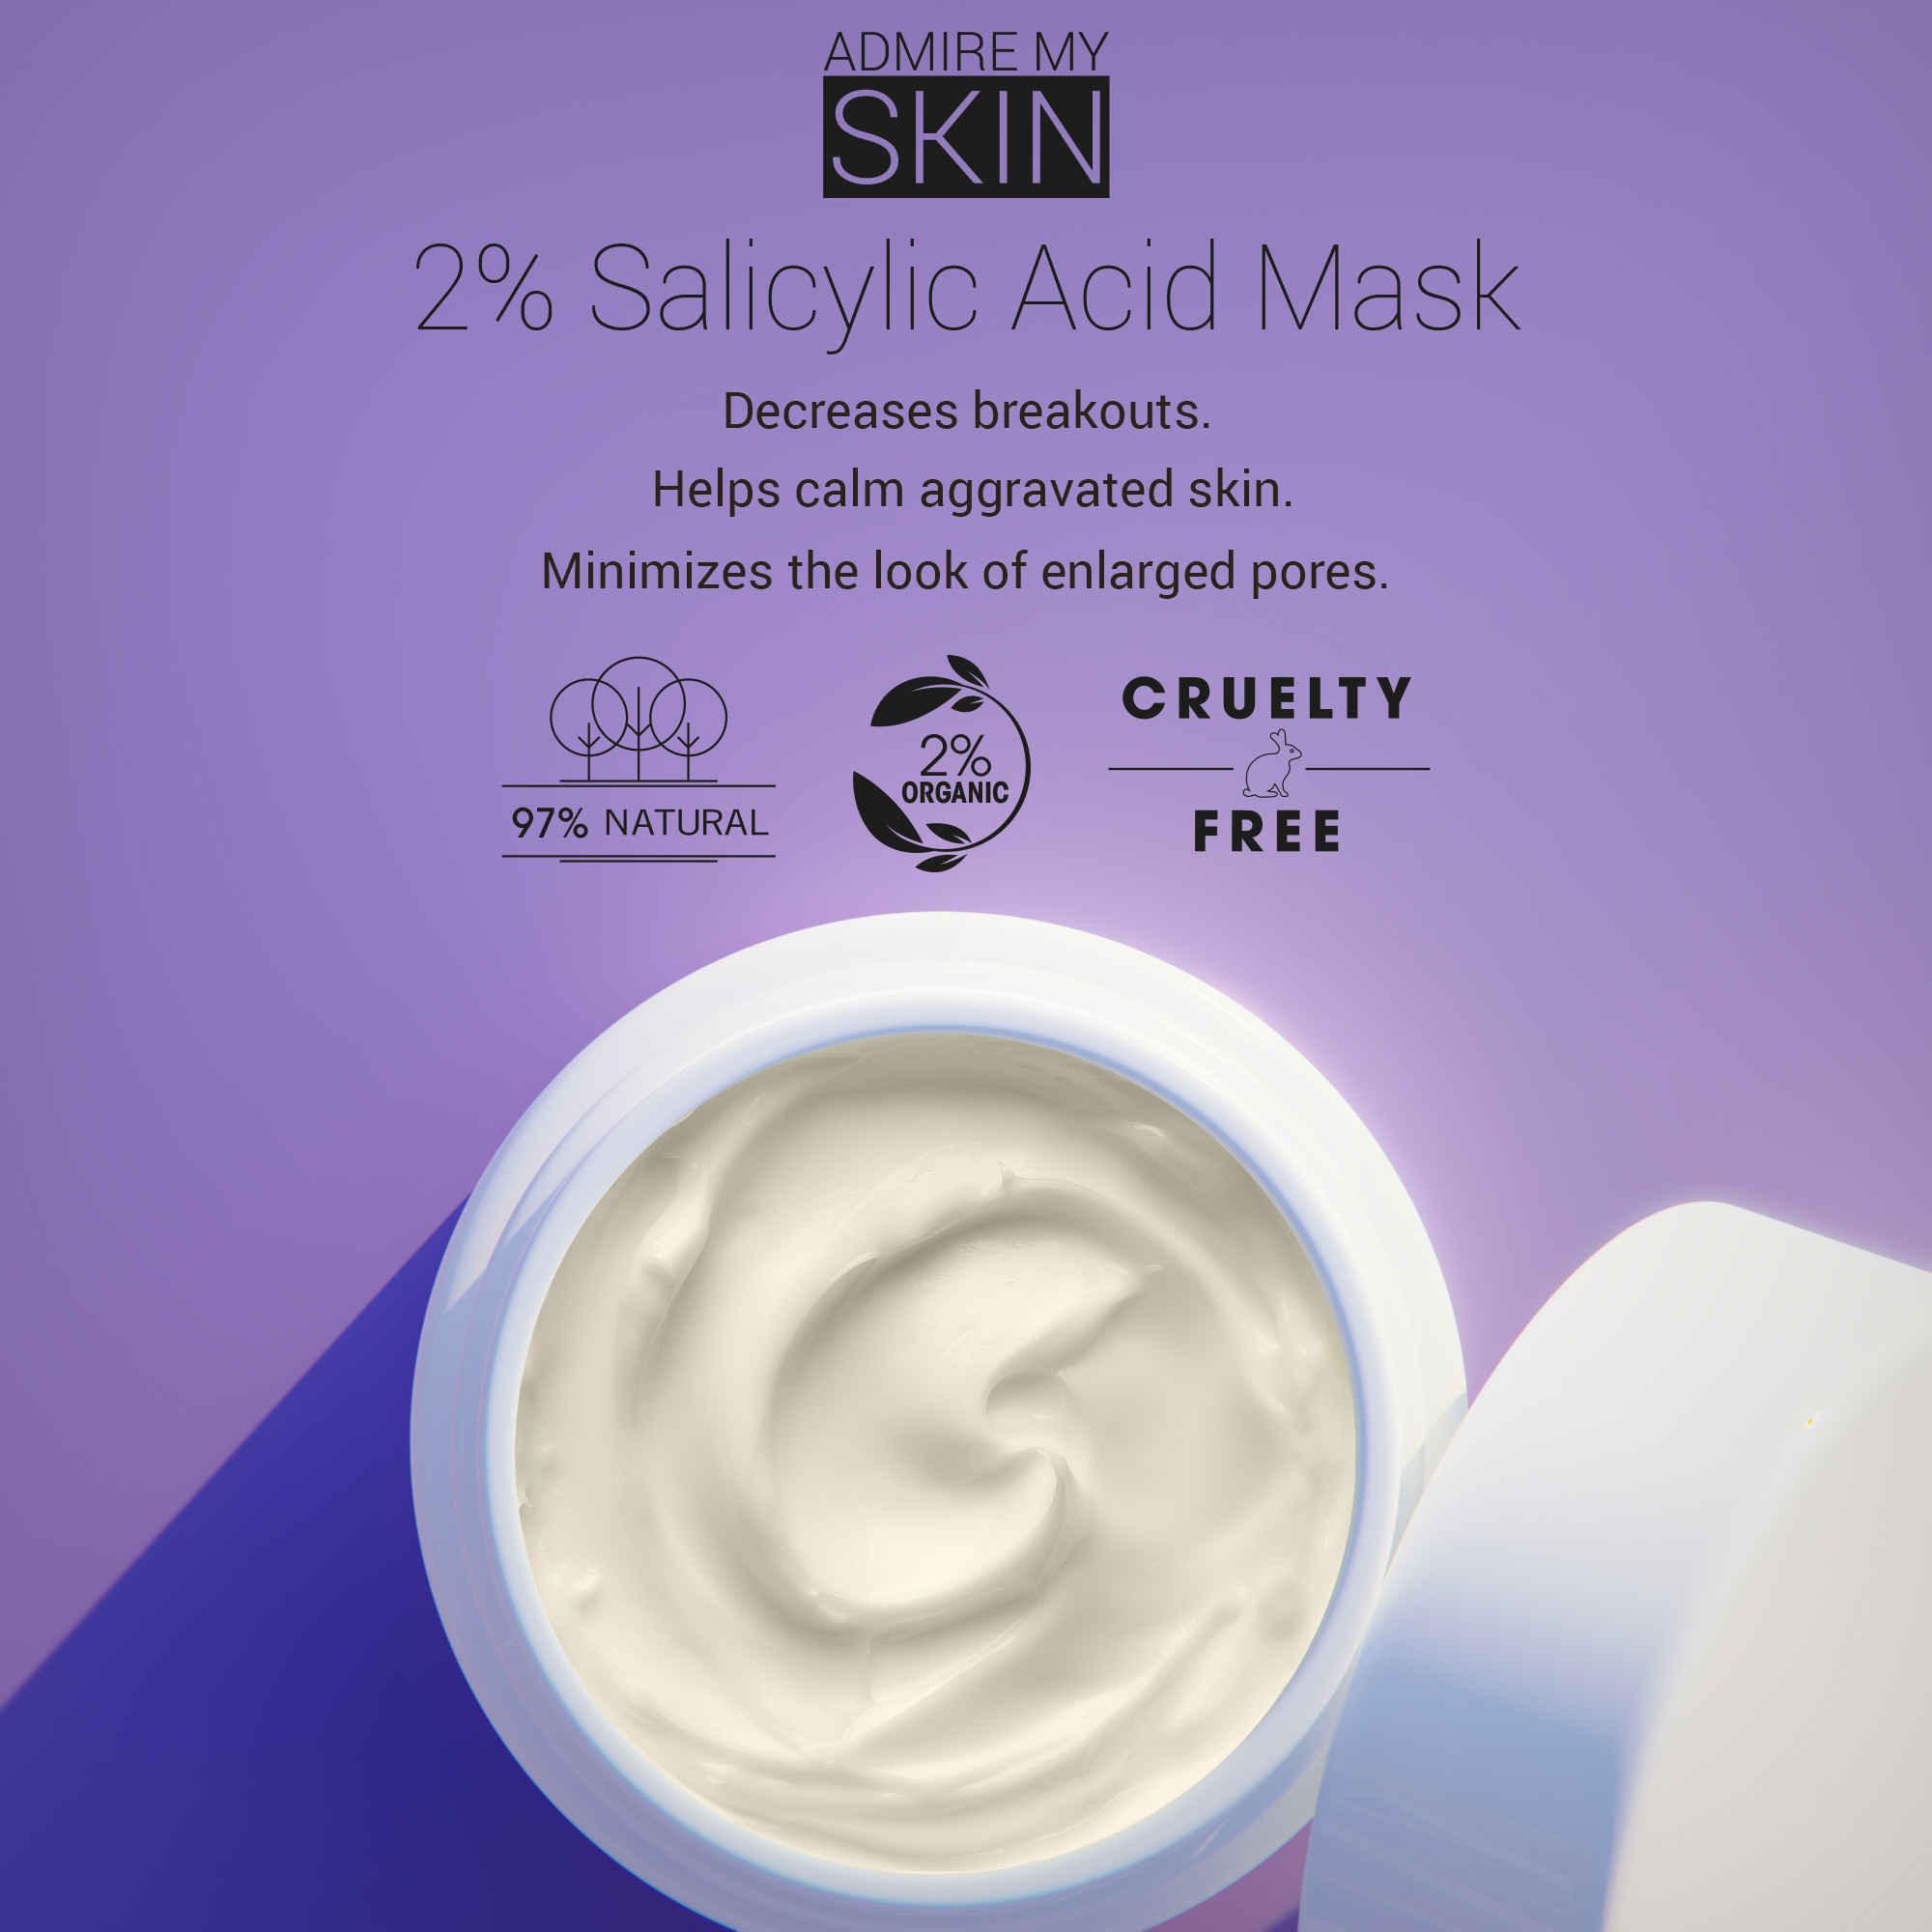 2% Salicylic Acid Facemask For Acne - Admire My Skin